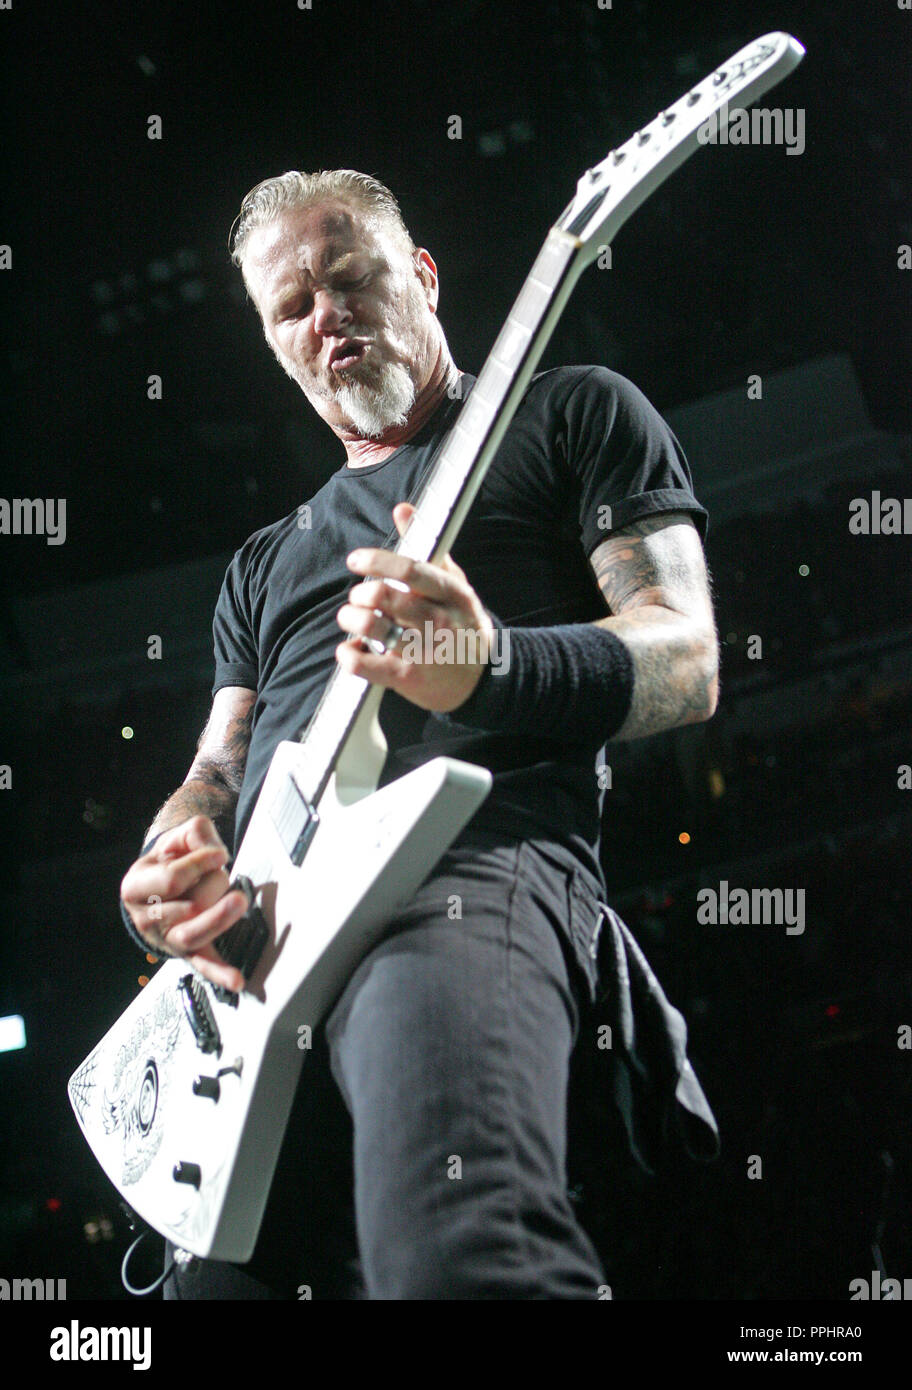 James Hetfield with Metallica performs in concert at the BankAtlantic Center in Sunrise, Florida on October 1, 2009. Stock Photo